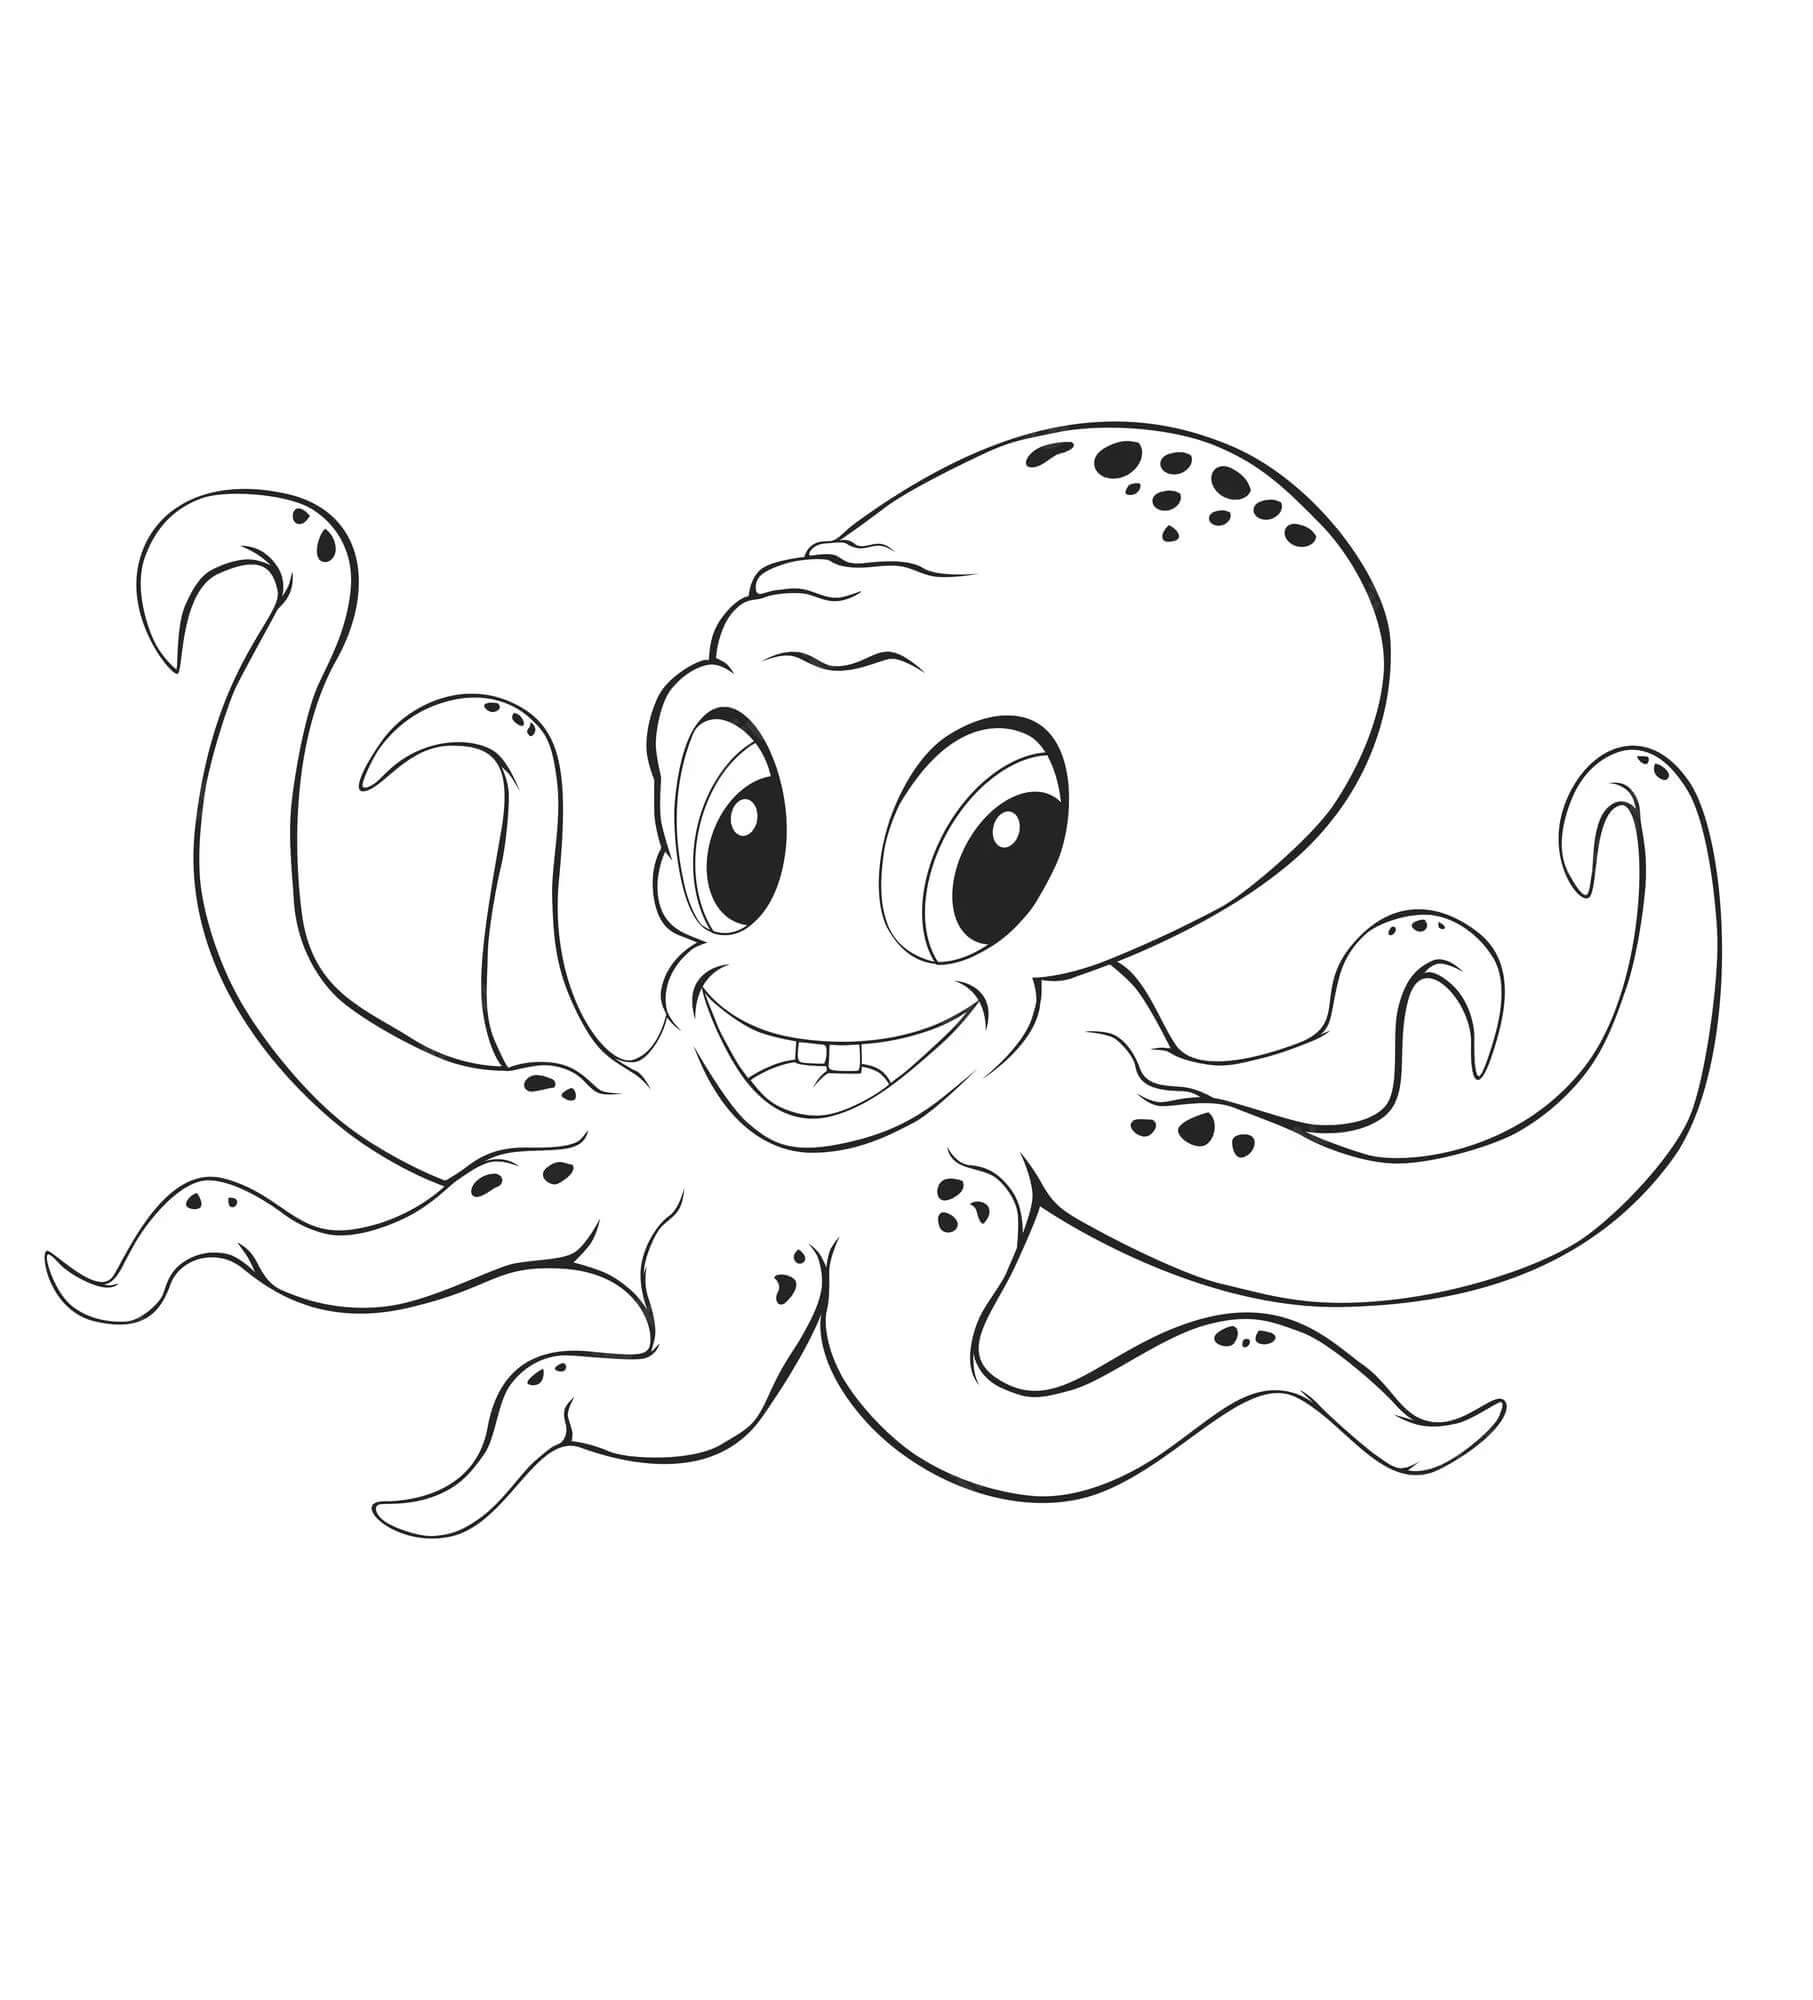 Red Octopus coloring page - Download, Print or Color Online for Free